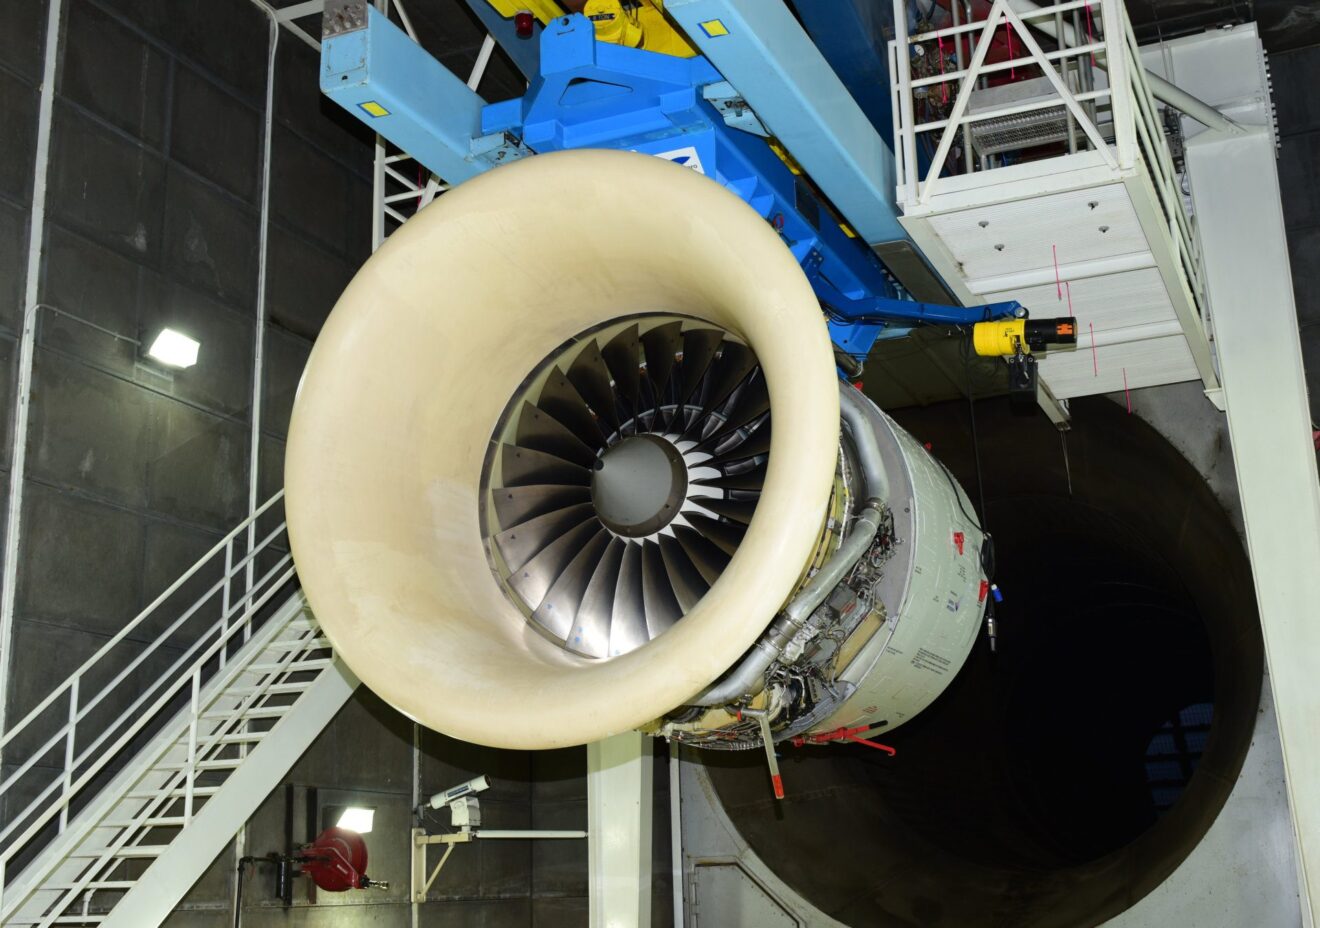 RB211-535 engine in test cell © StandardAero